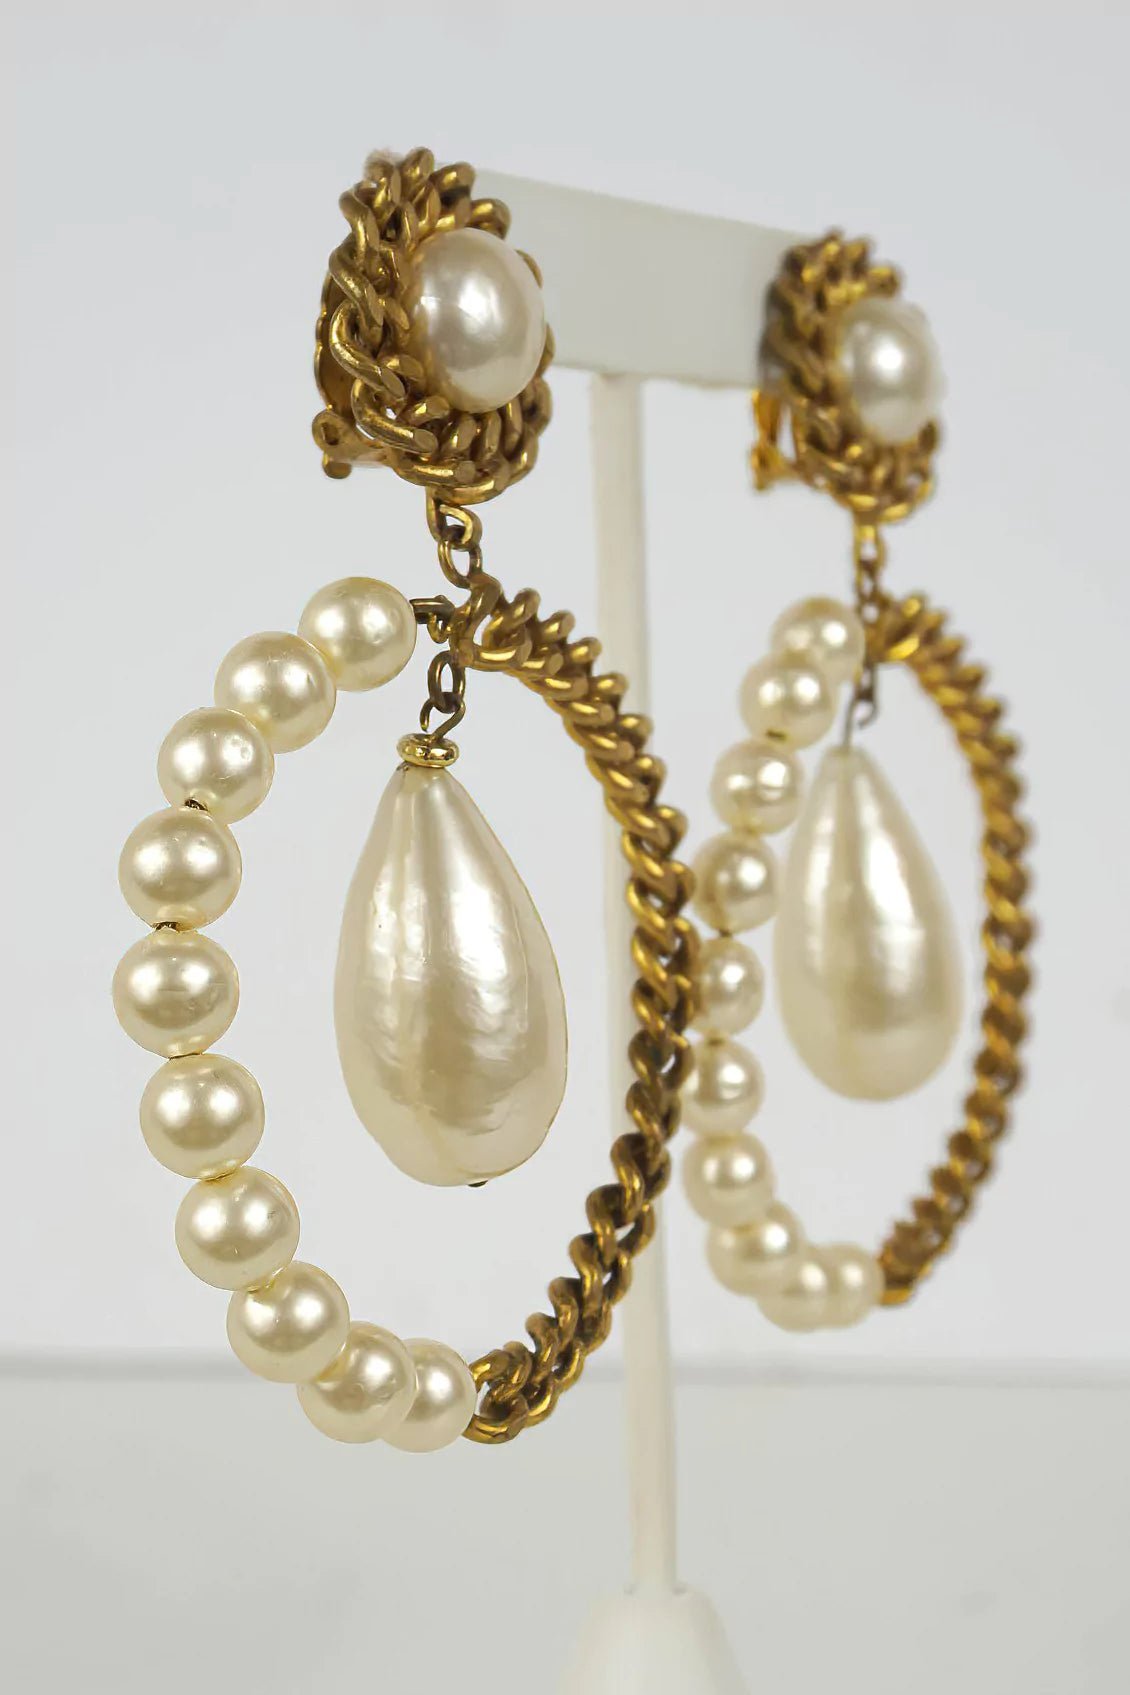 Chanel Vintage 1970's Large Chain and Pearl Drop Earrings - Foxy Couture Carmel